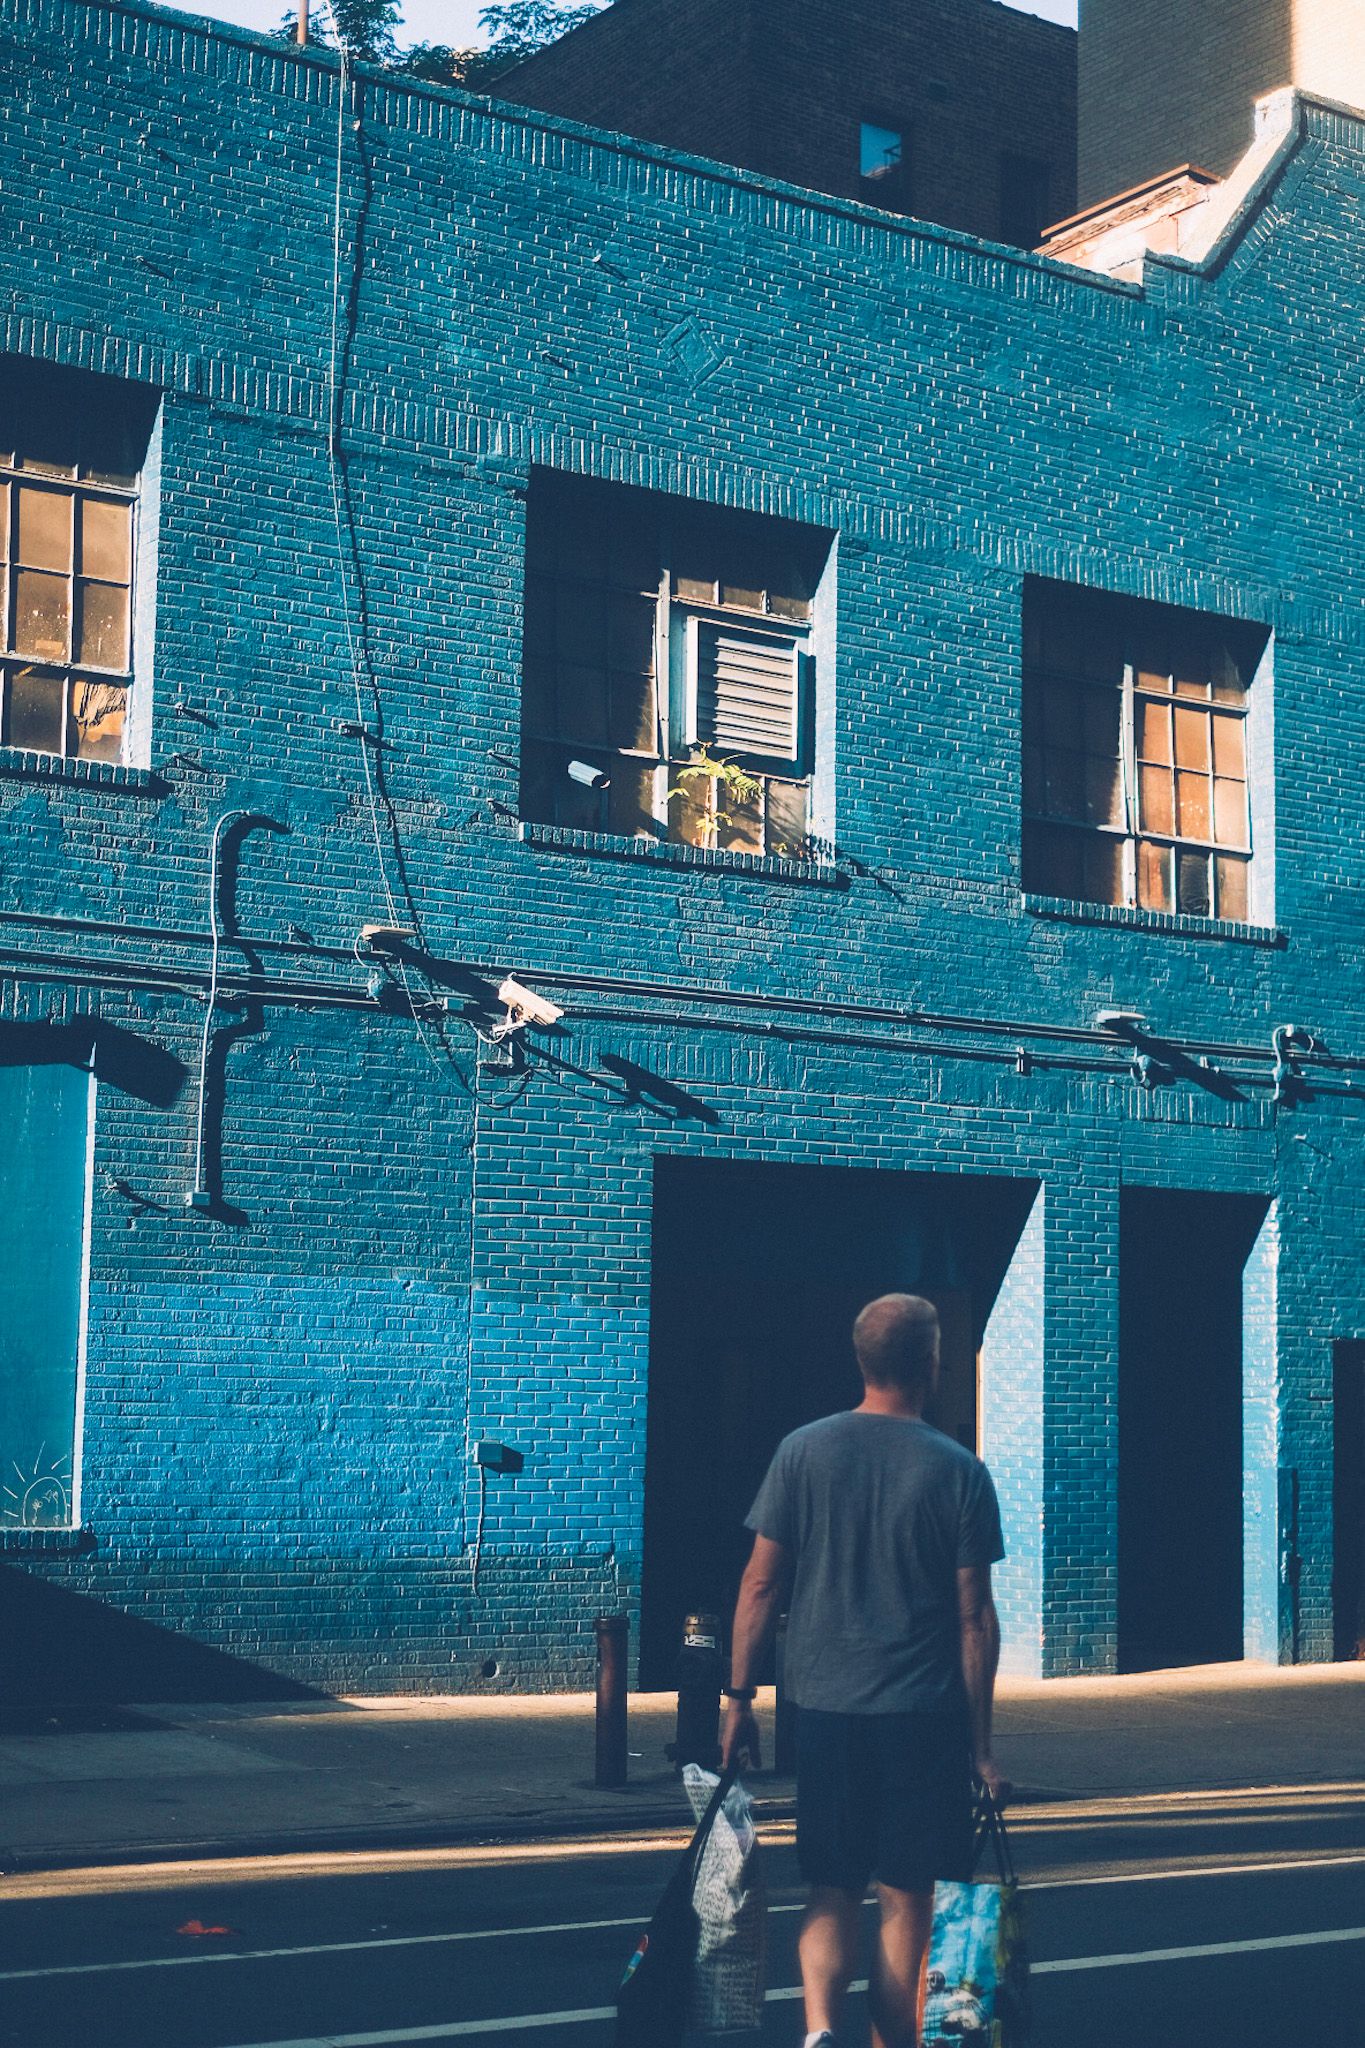 A man walks in front of the camera toward a blue brick building lit with morning sun.